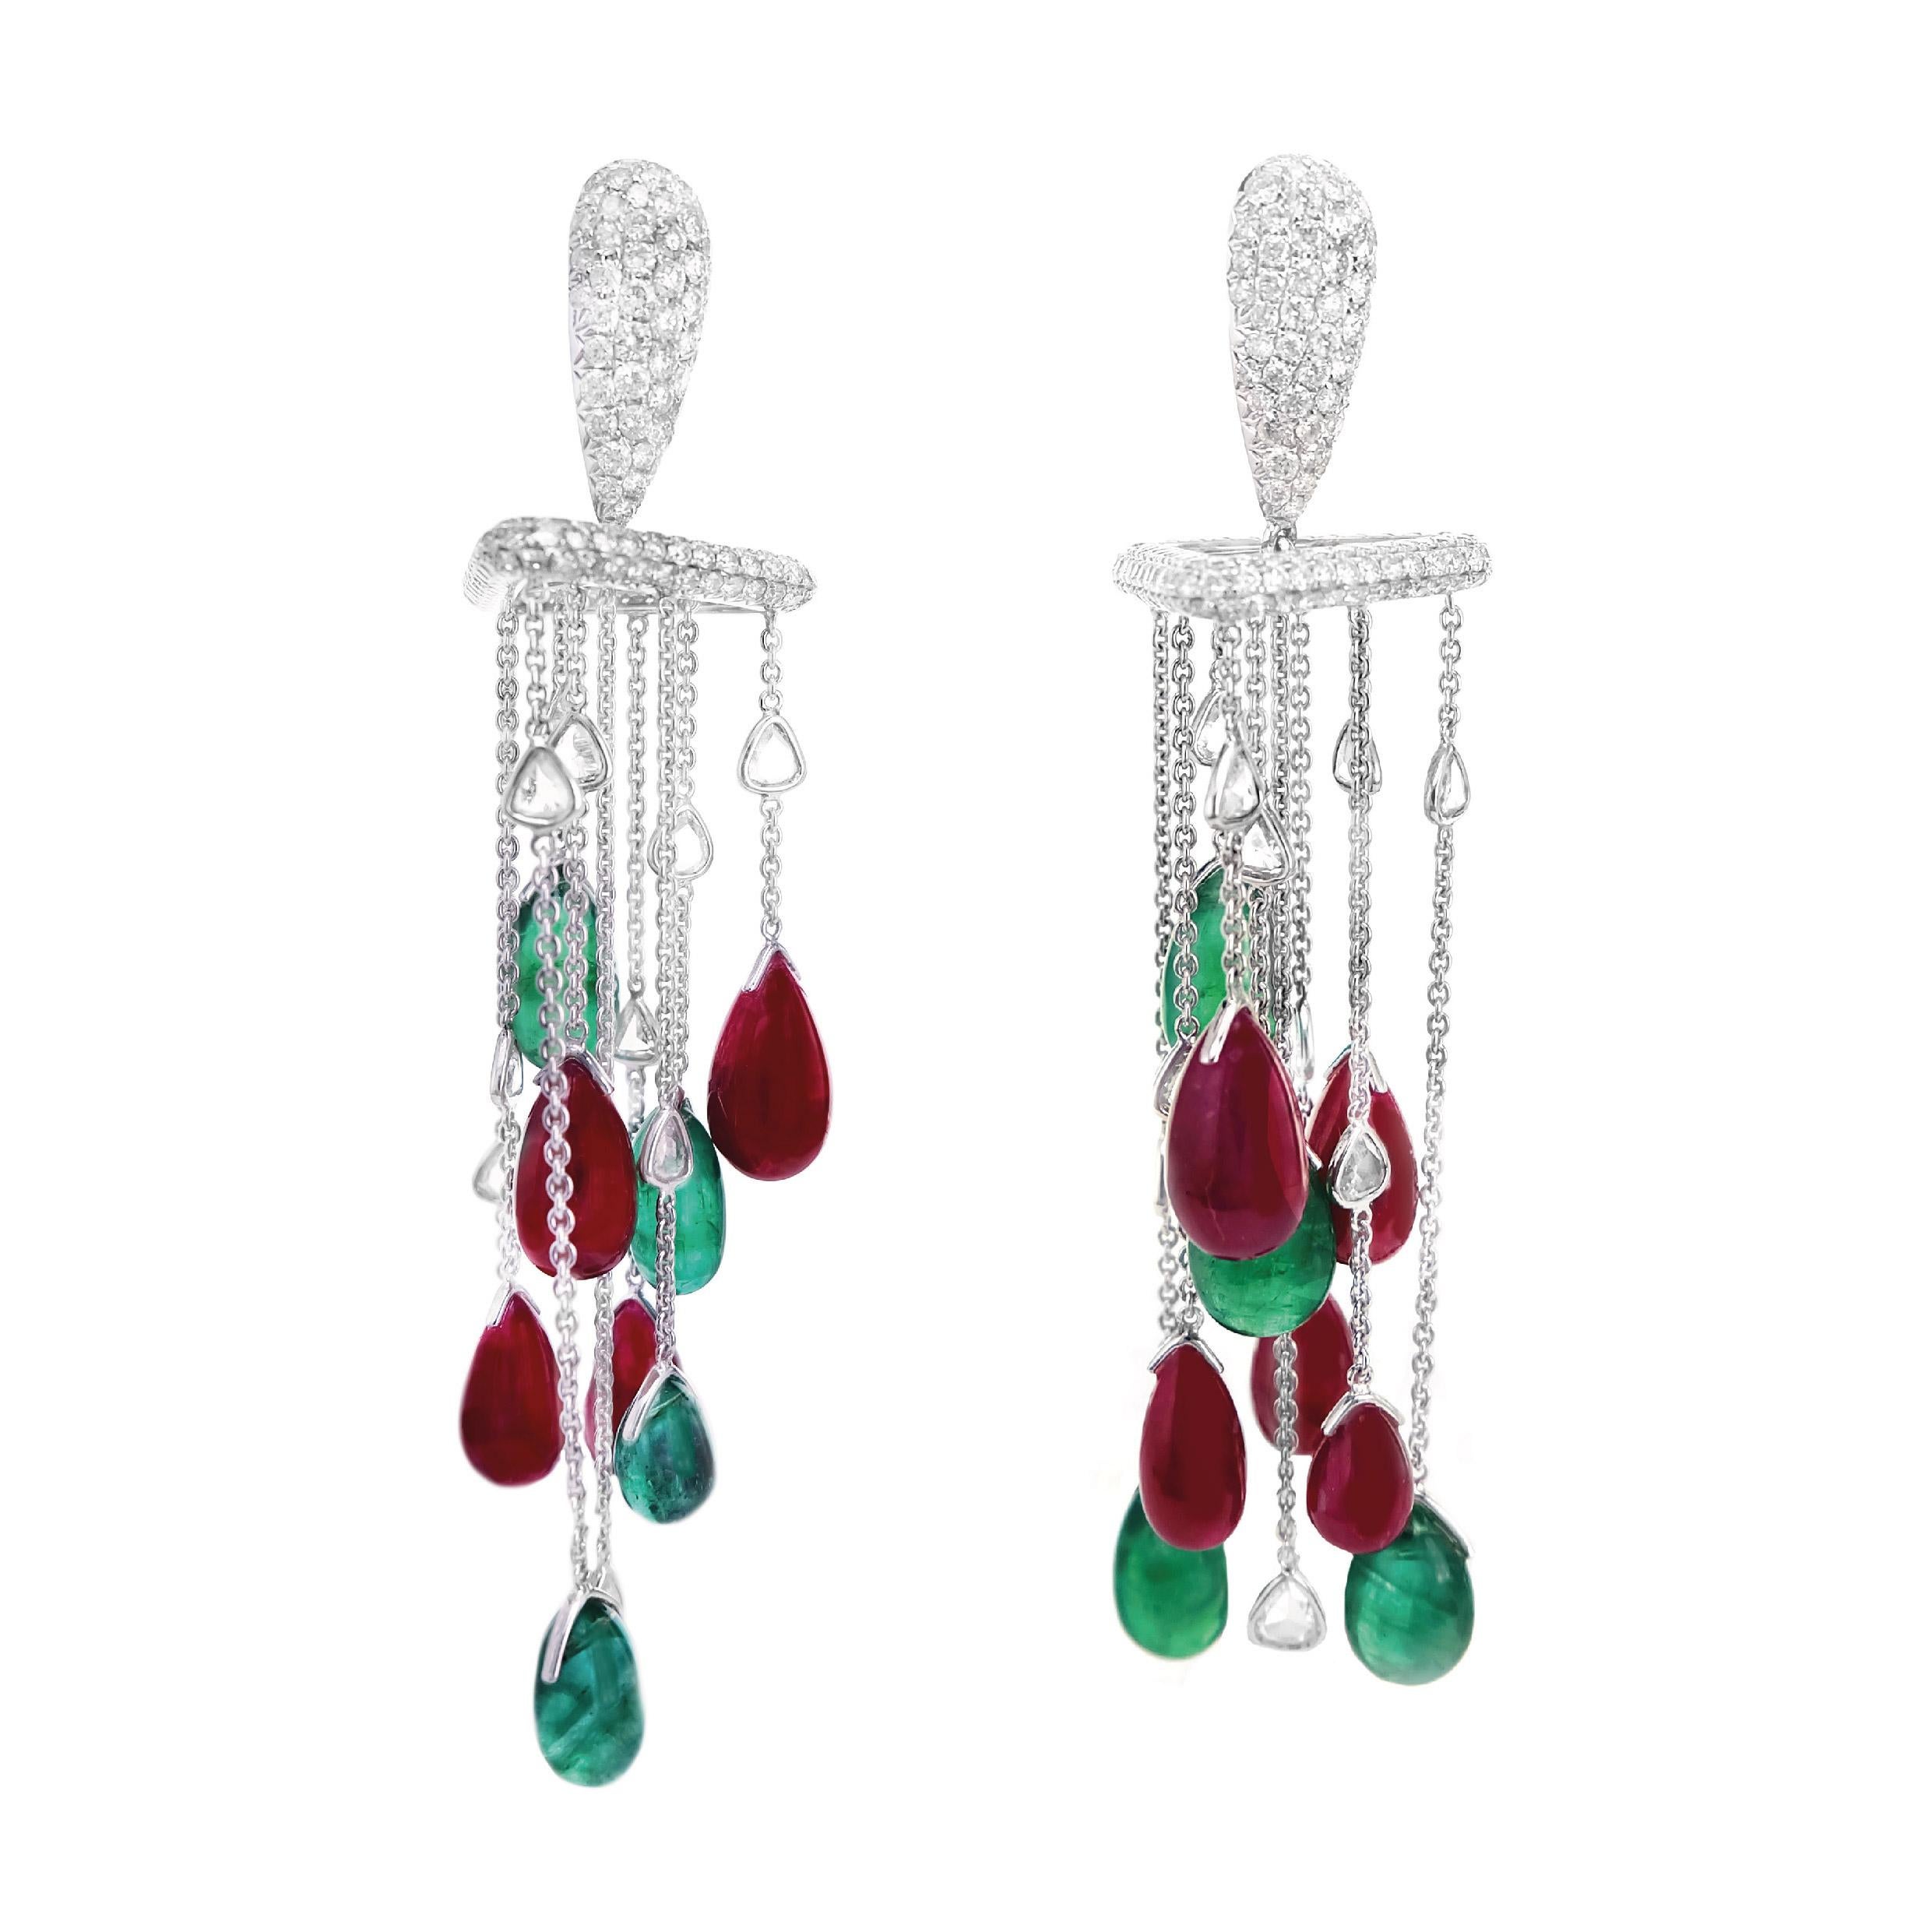 Aesthetic Movement 'Equilibrium' Earring Featured Ruby Emerald Diamond Cocktail Stunner For Sale